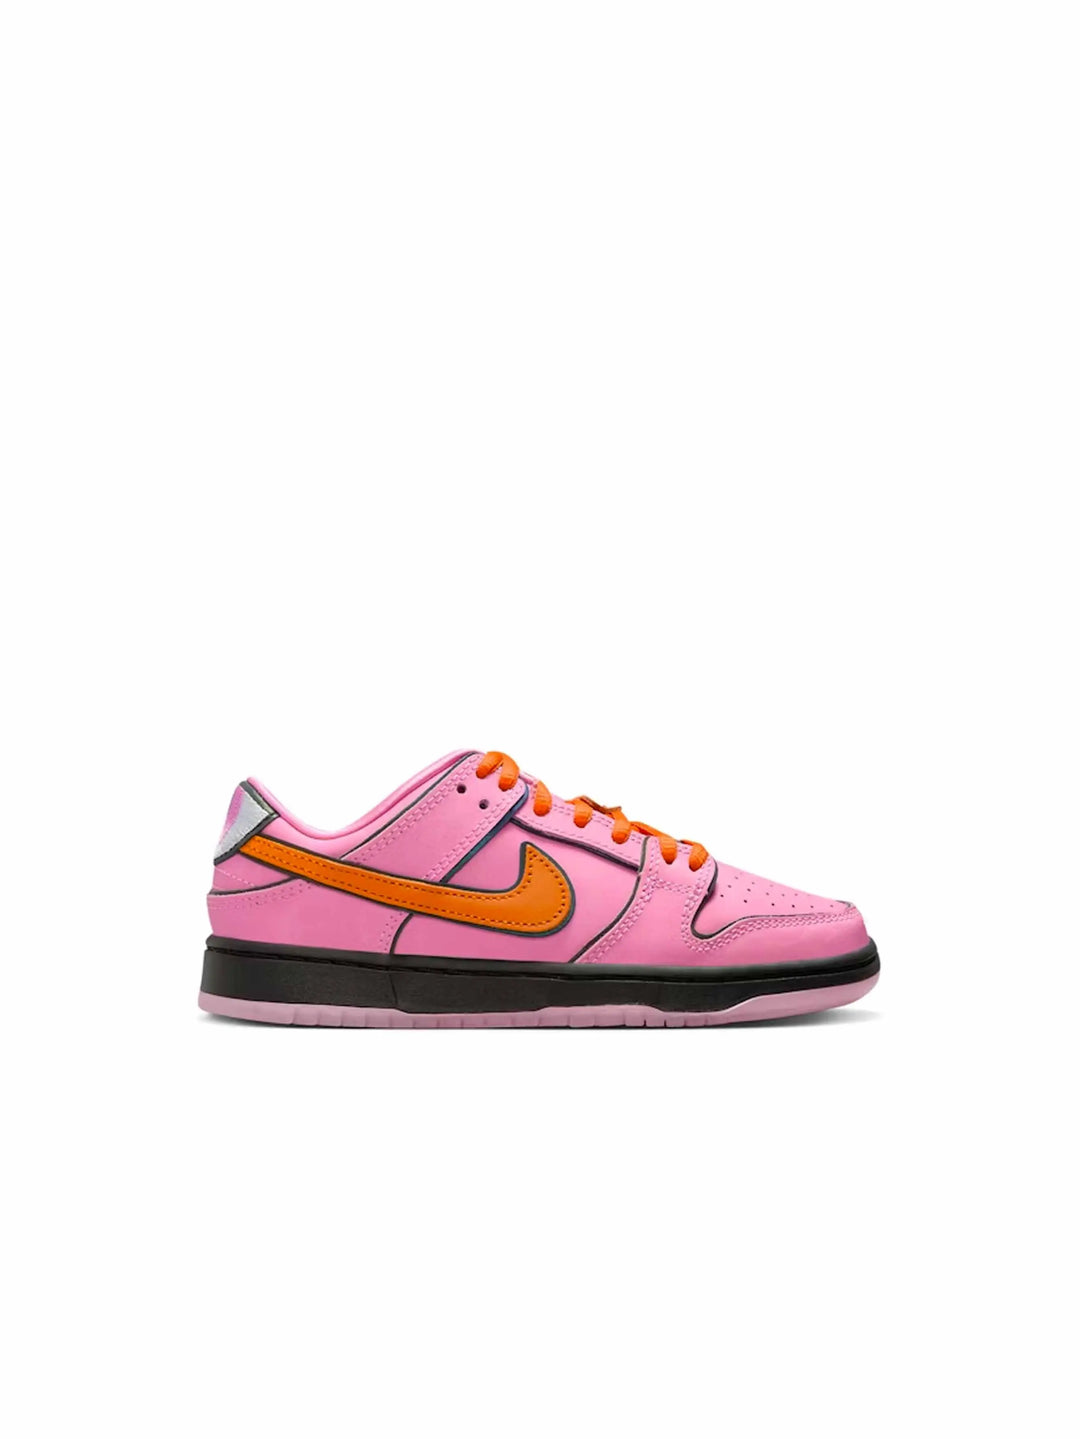 Nike SB Dunk Low The Powerpuff Girls Blossom (PS) in Auckland, New Zealand - Shop name